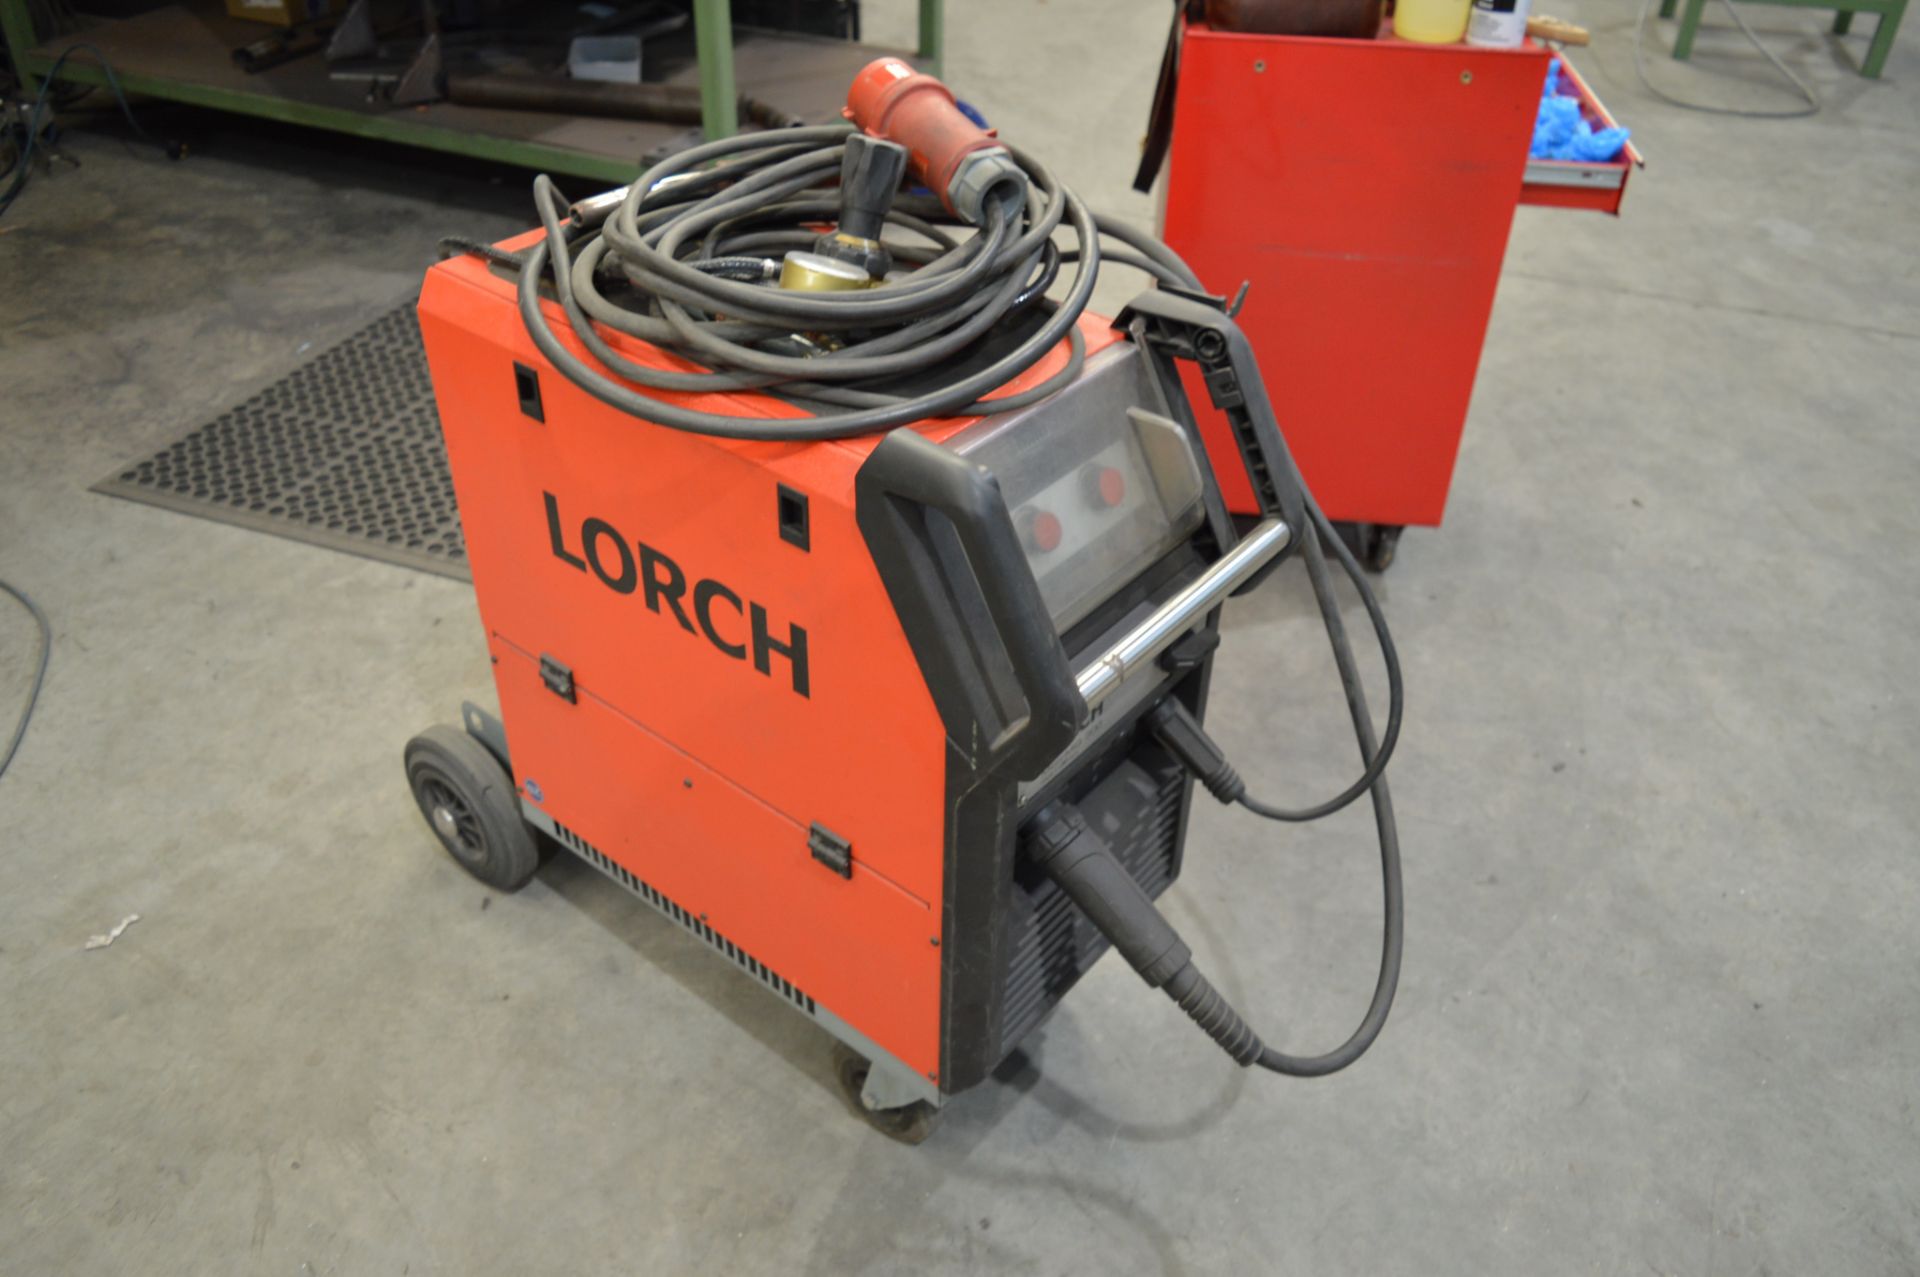 Lorch Micromig 300 MIG welder S/N: 4064-2630-0007-4 c/w torch, regulator and earth lead - Image 3 of 5